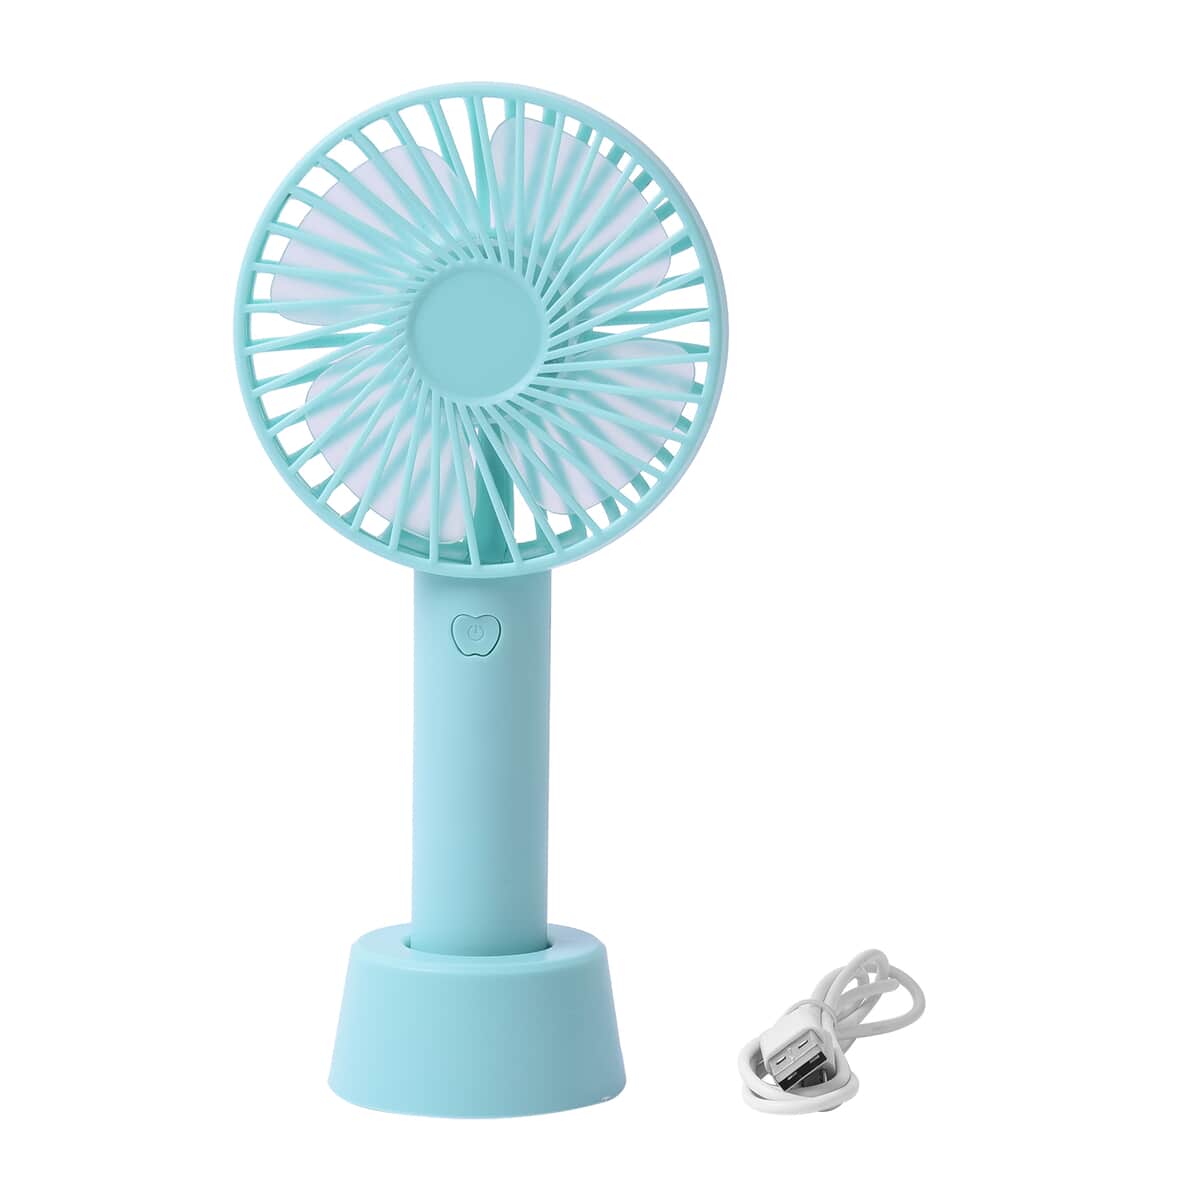 Homesmart Green Portable Handy Mini Fan with 3 Speed Setting (1200 mAh) image number 0